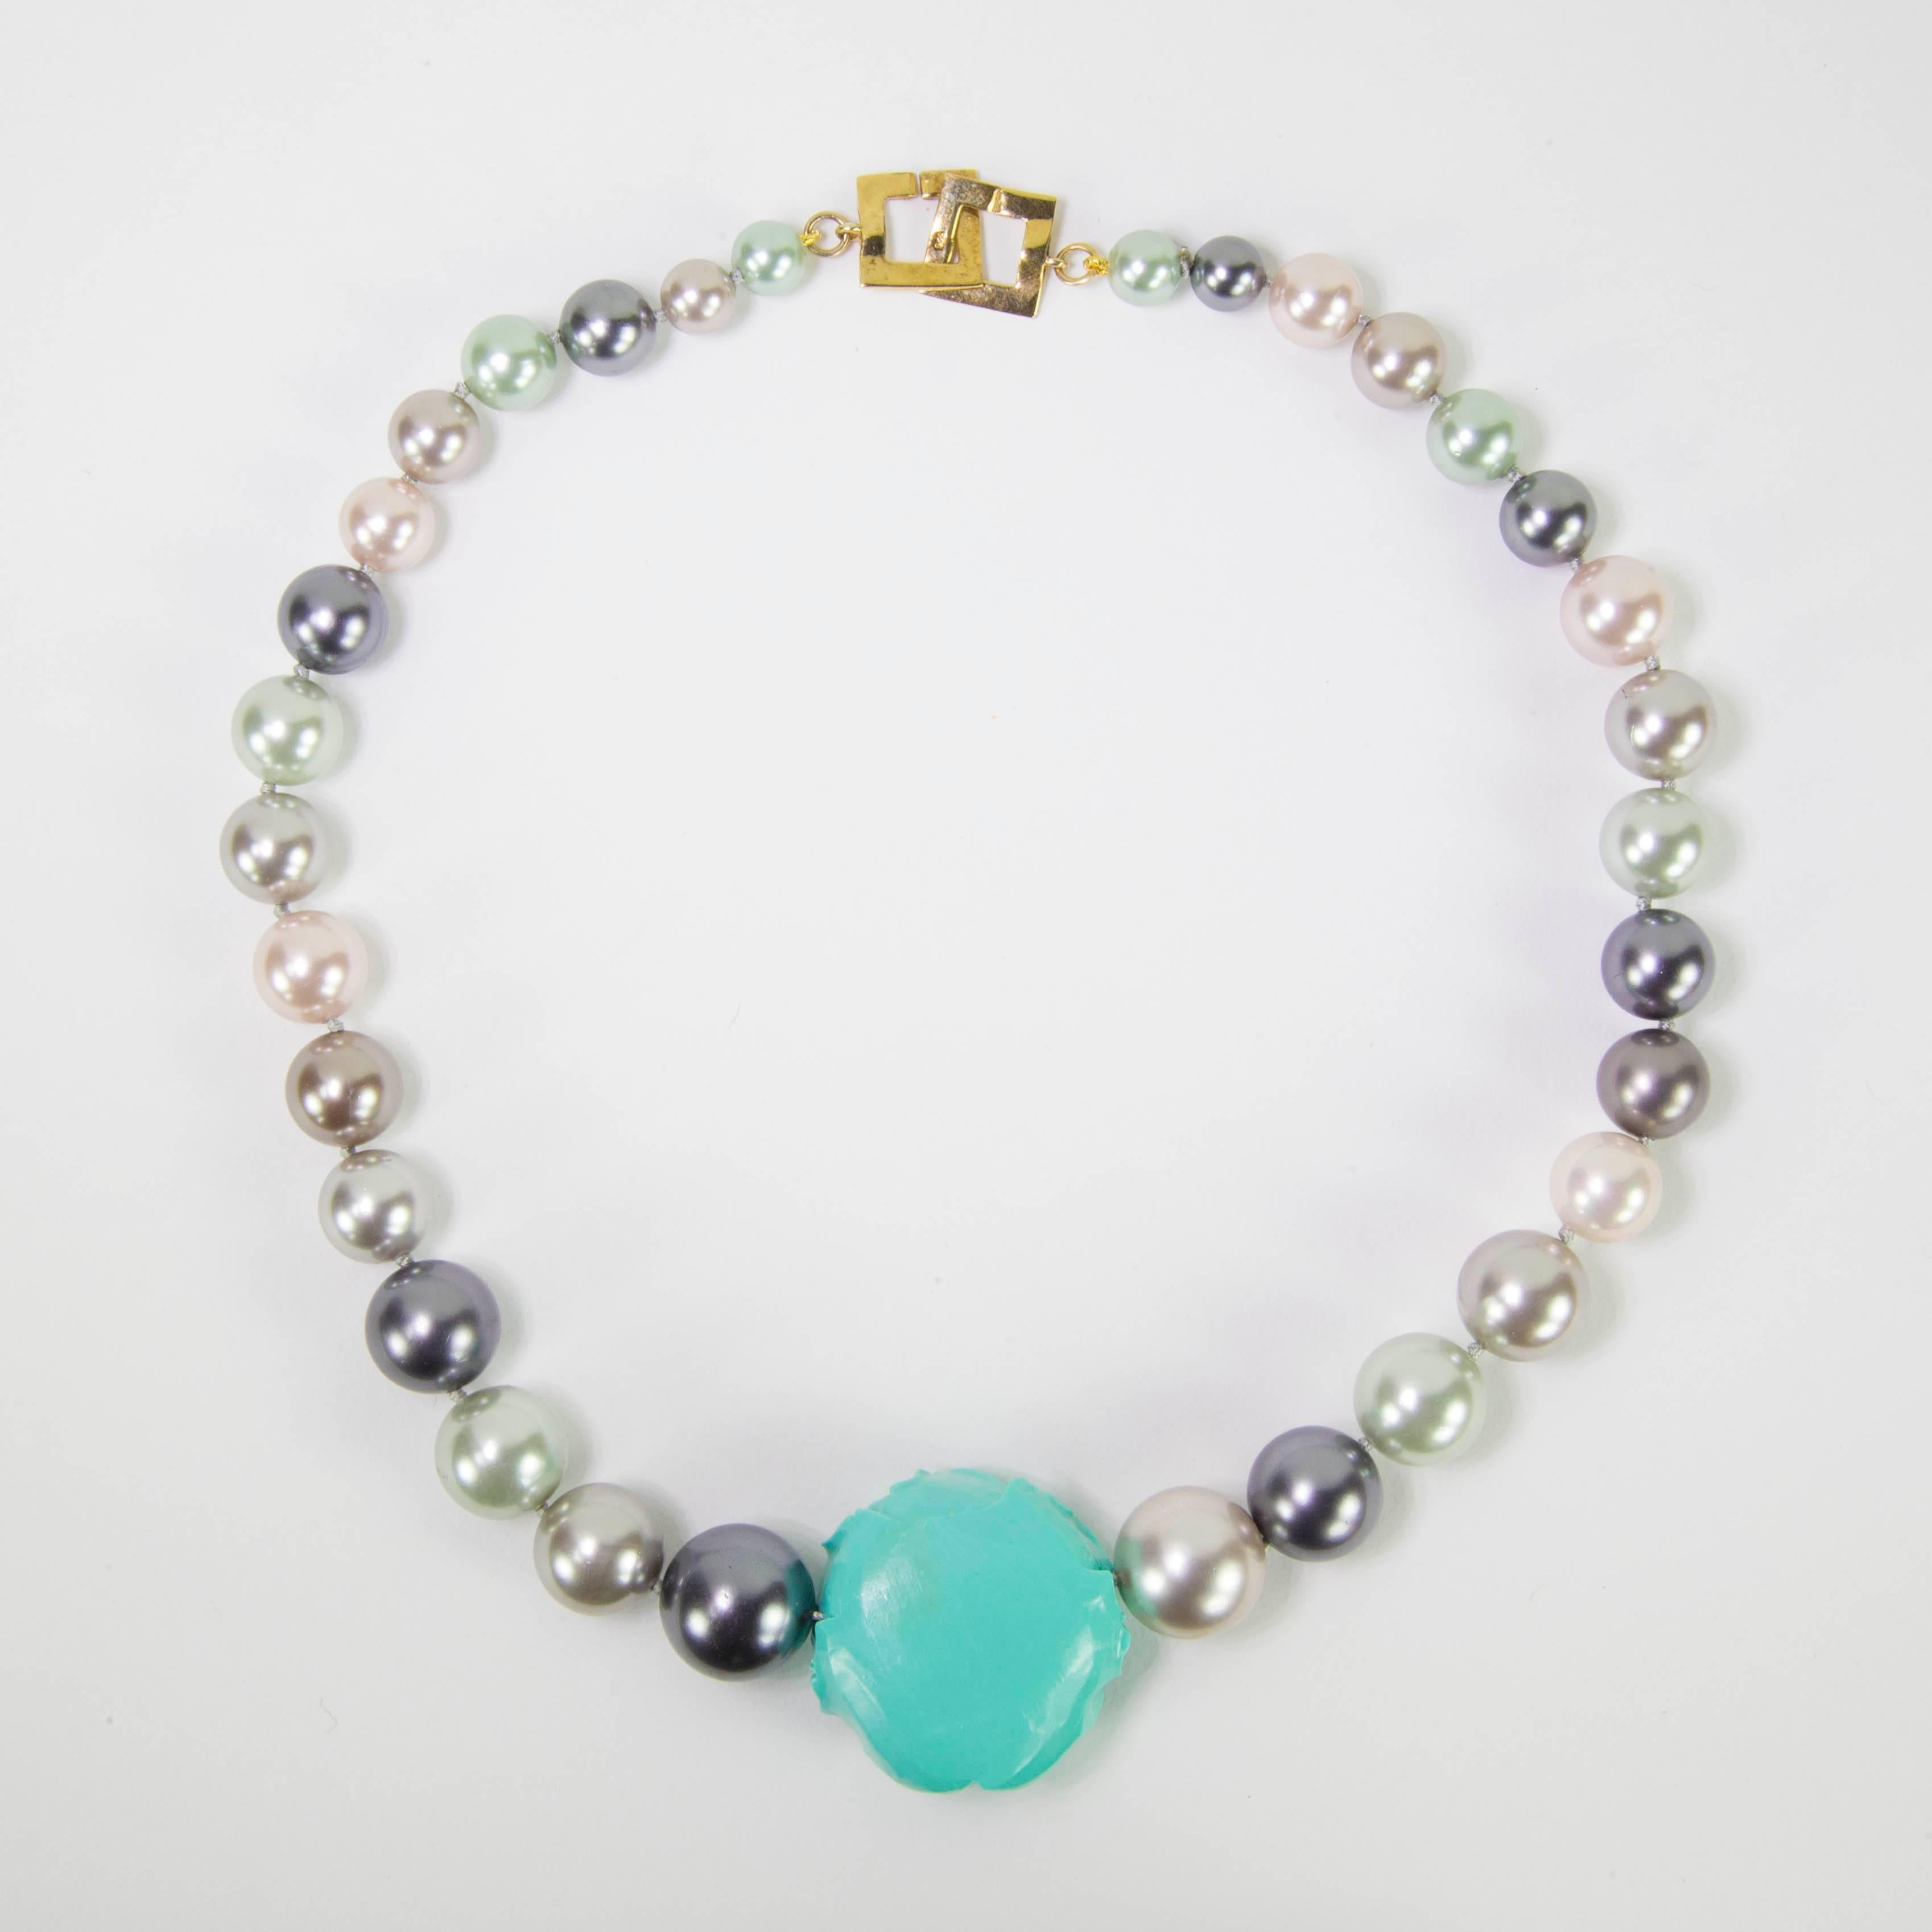 Modern Sriking Faux Pearl and Carved Turquoise Flower Runway Necklace